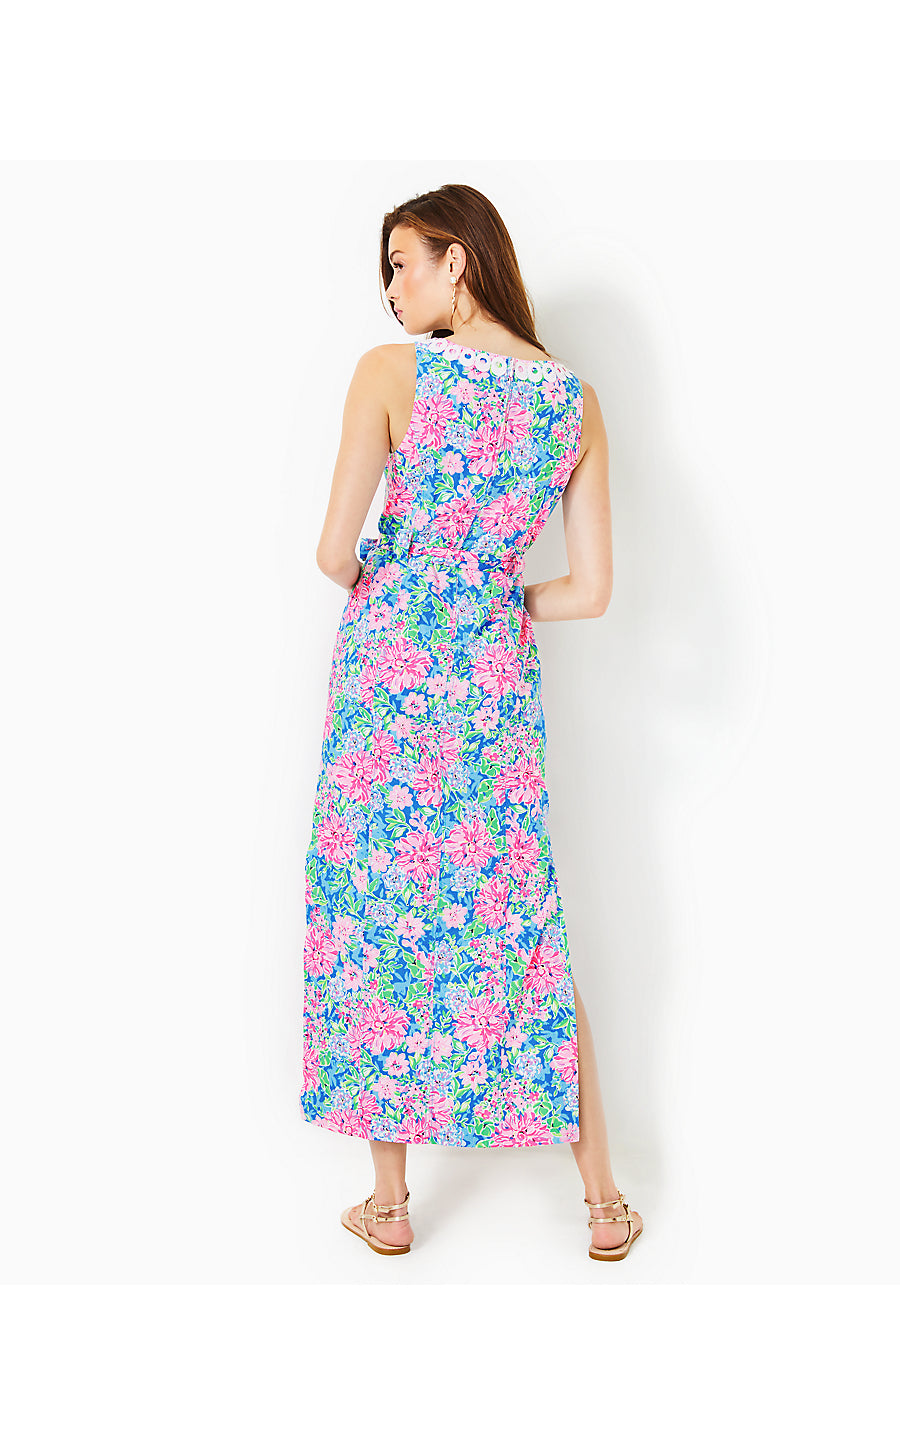 GULIANNA DRESS - SPRING IN YOUR STEP